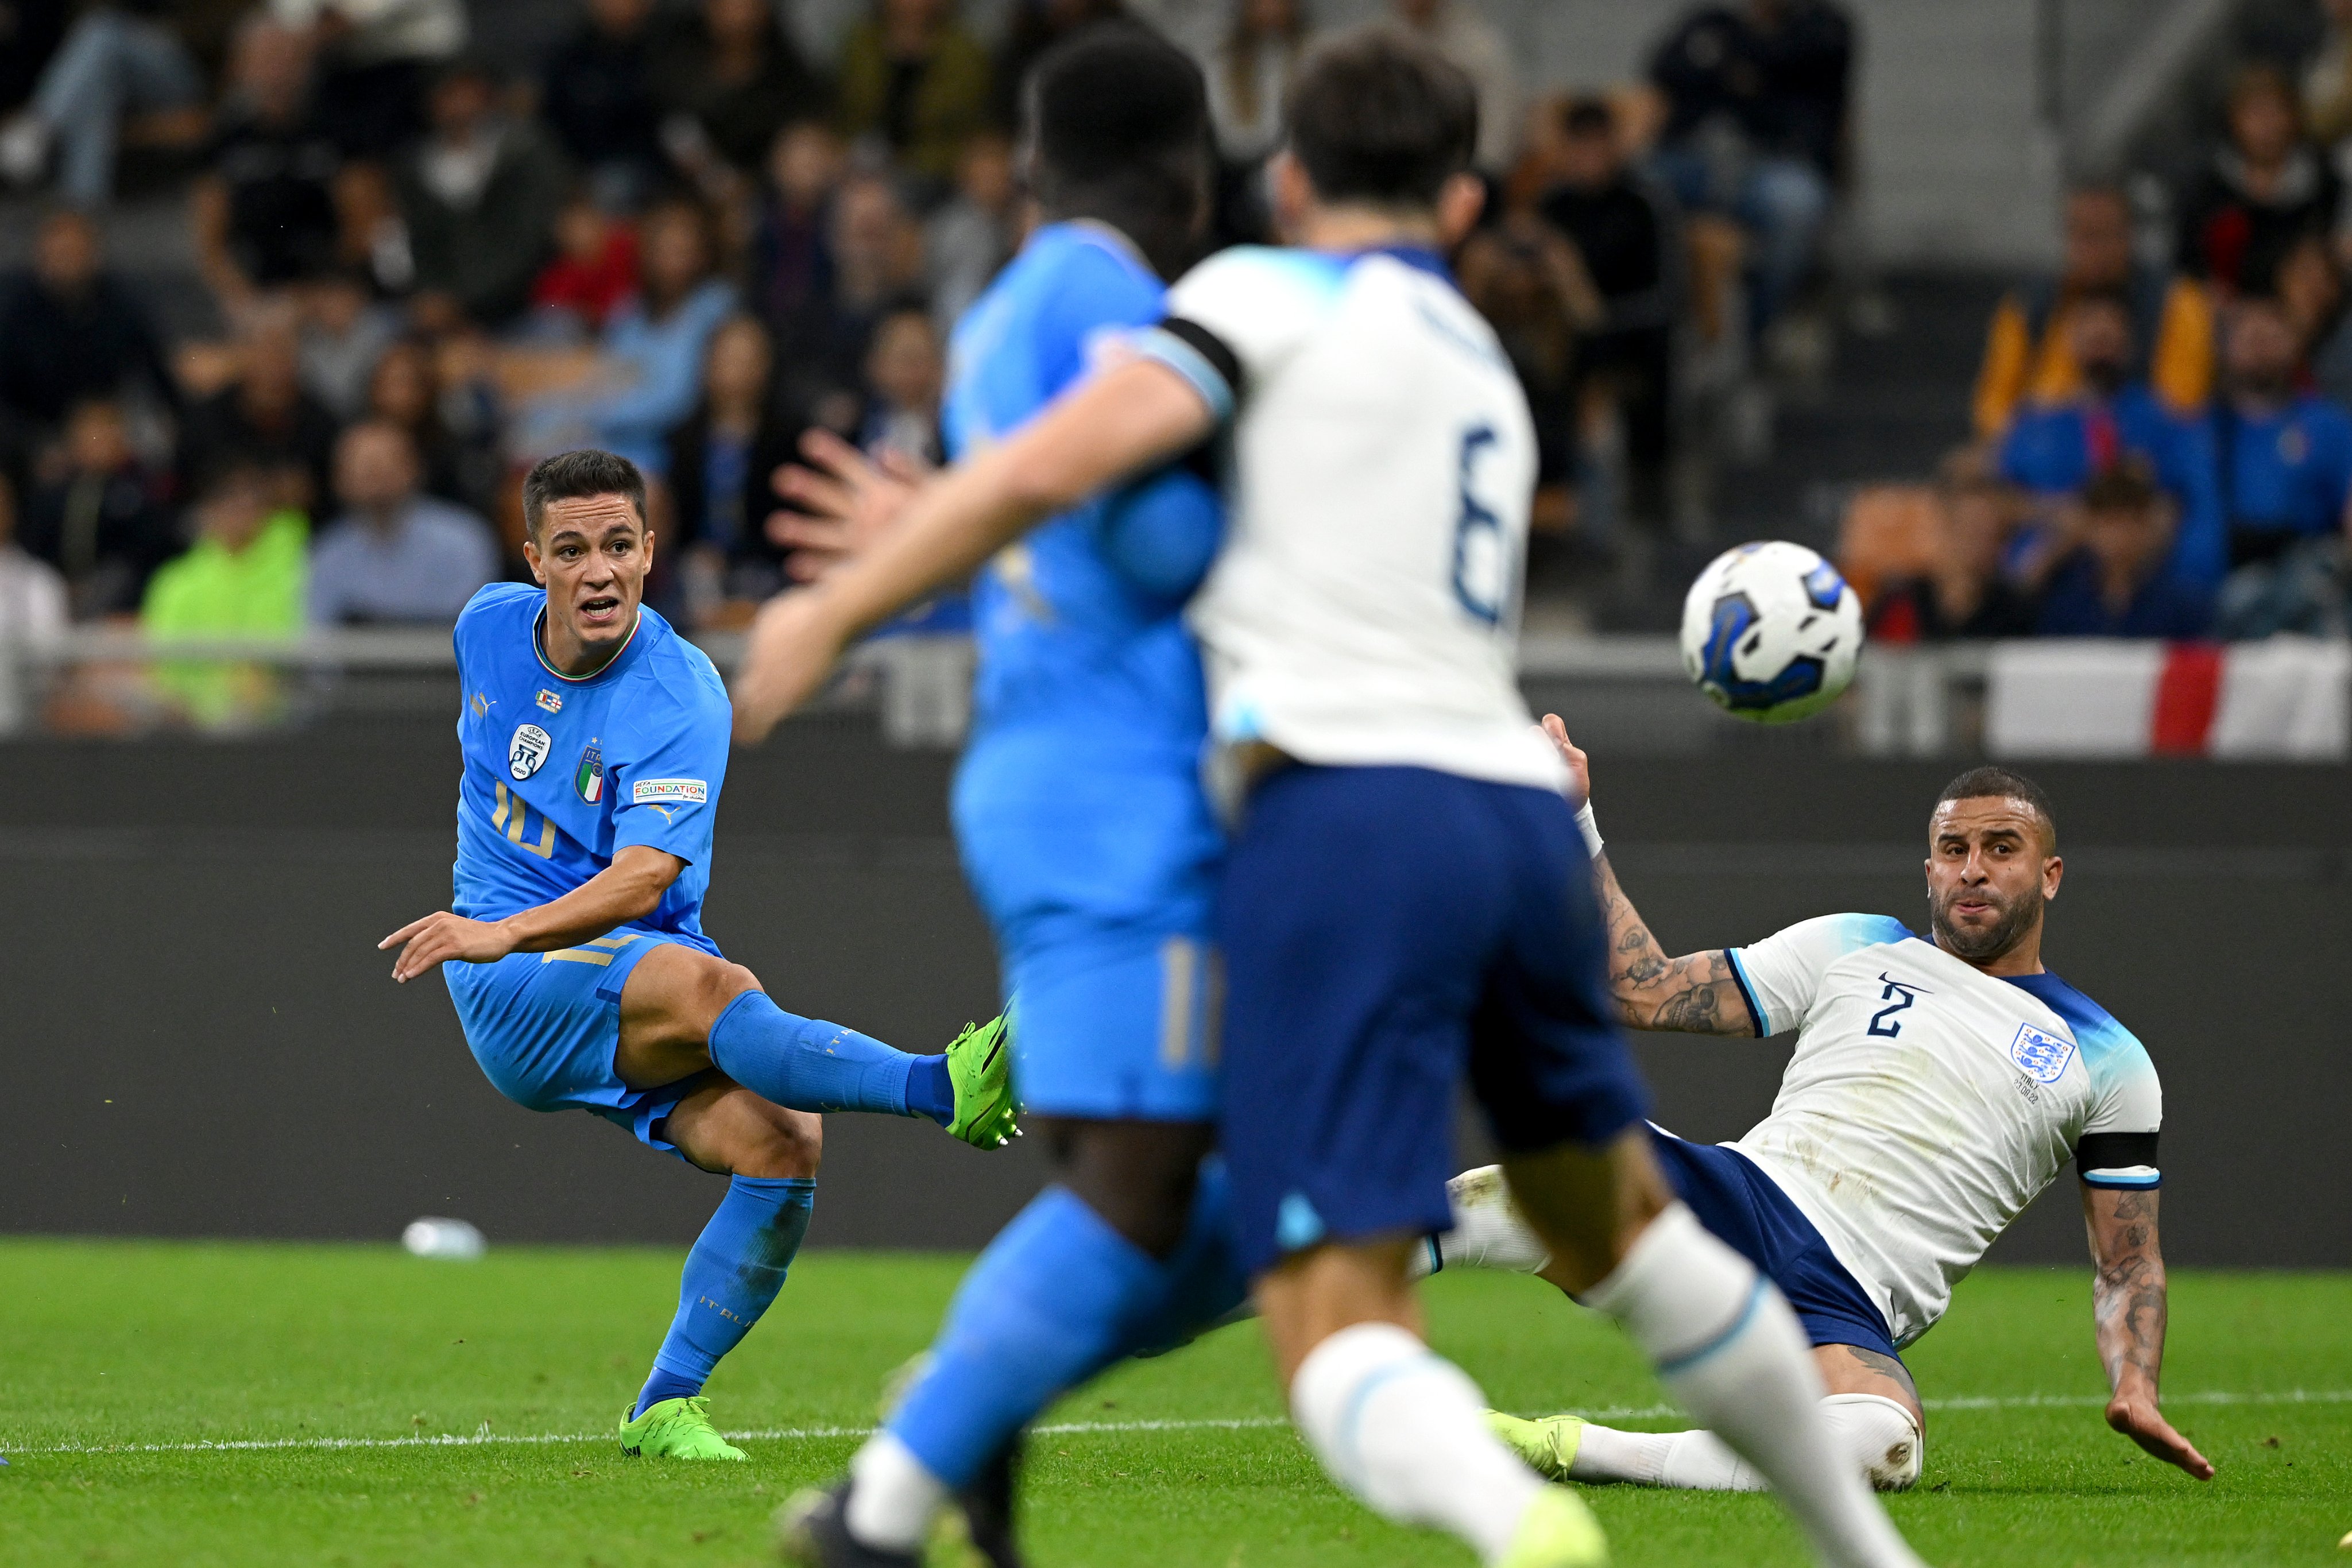 UEFA Nations League 2022 LIVE: Hungary to keep up  MOMENTUM in highly contested encounter against Italy - Check Hungary vs Italy-LIVE, Predicted XI, Live Streaming – Follow Live